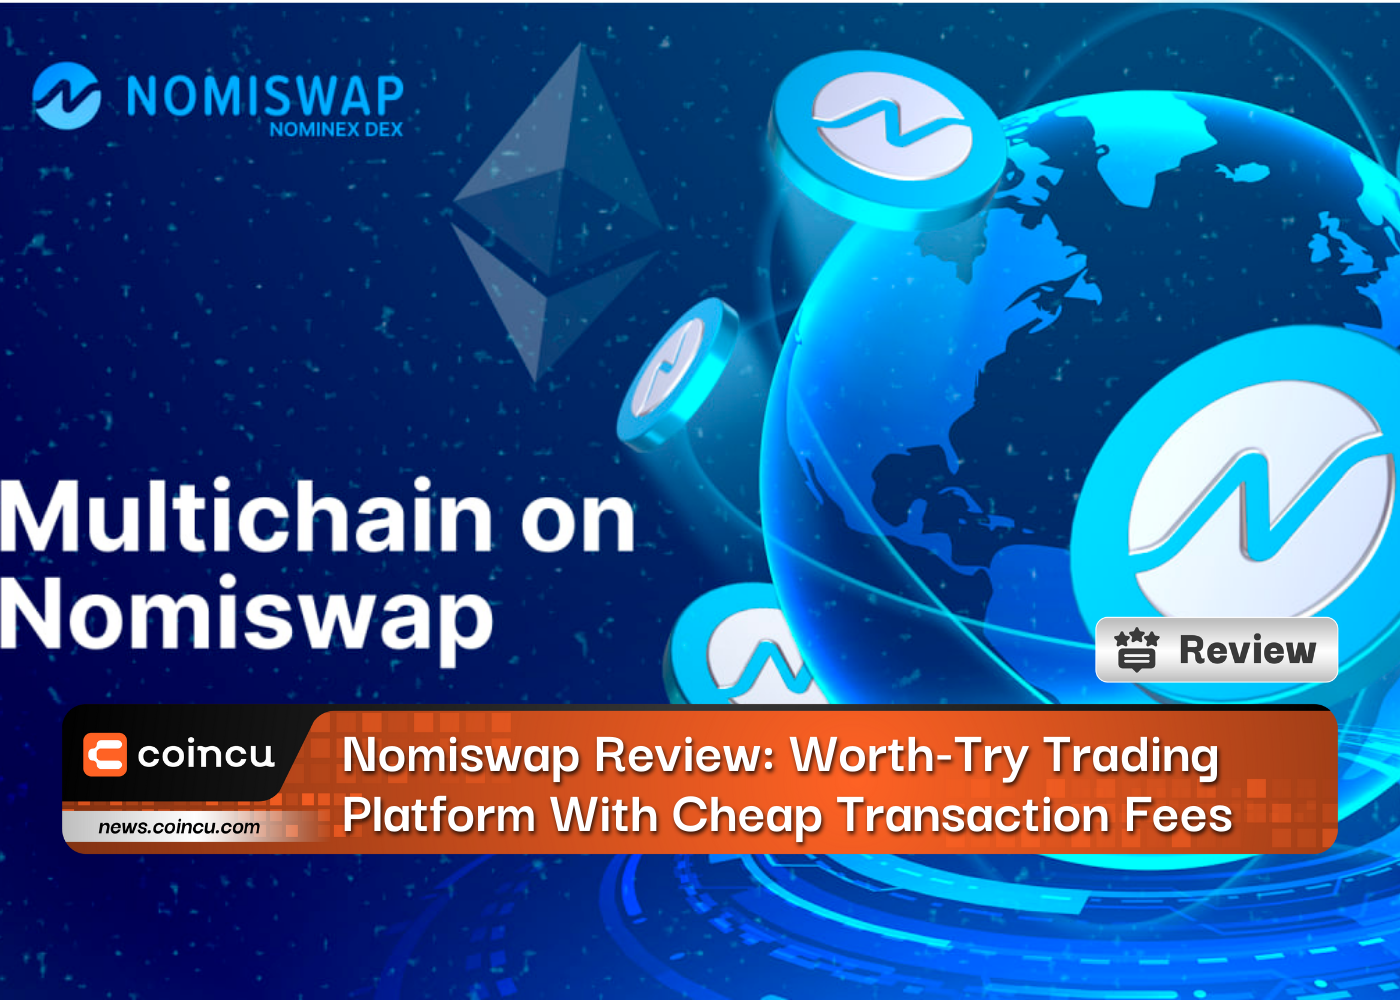 Nomiswap Review: Worth-Try Trading Platform With Cheap Transaction Fees